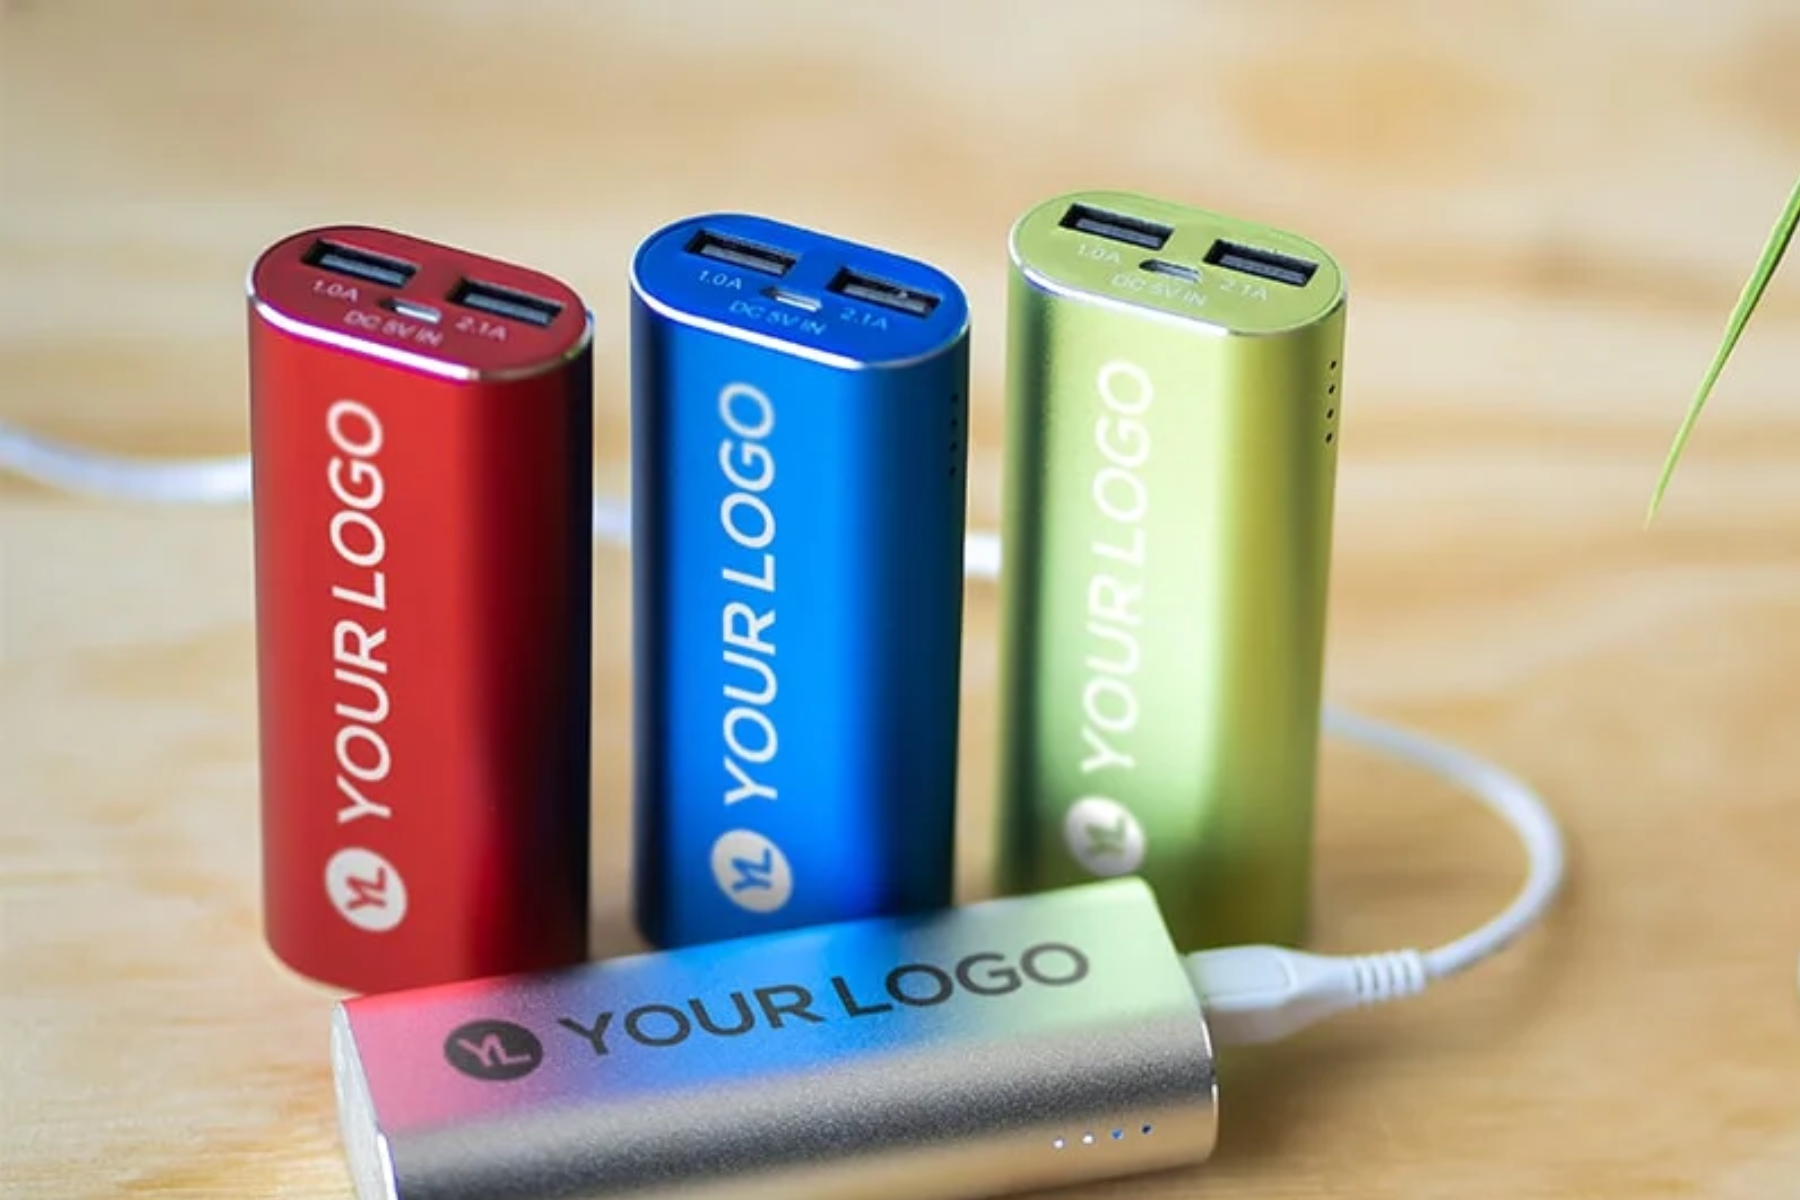 Four different colored powerbanks